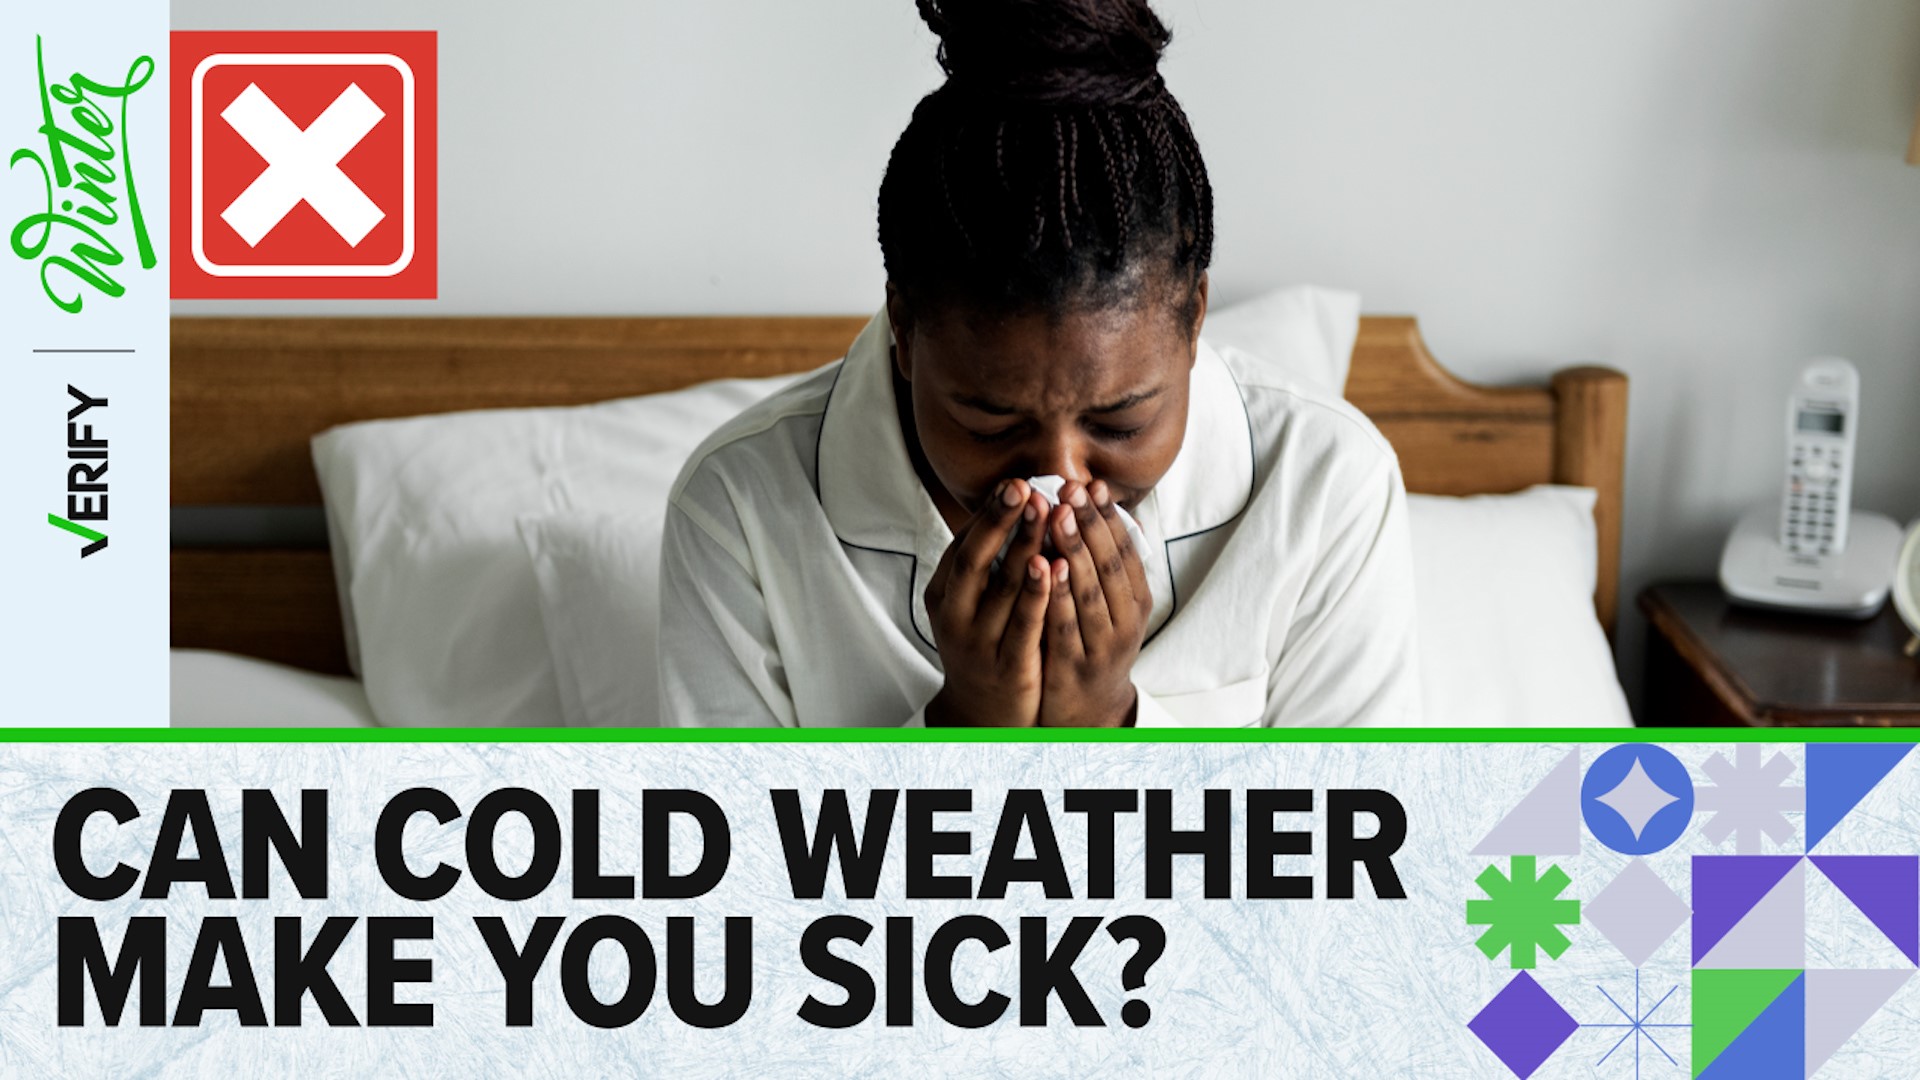 It’s a myth that cold or rainy weather can cause a cold. Instead, colds are minor infections of the nose and throat caused by more than 200 different viruses.